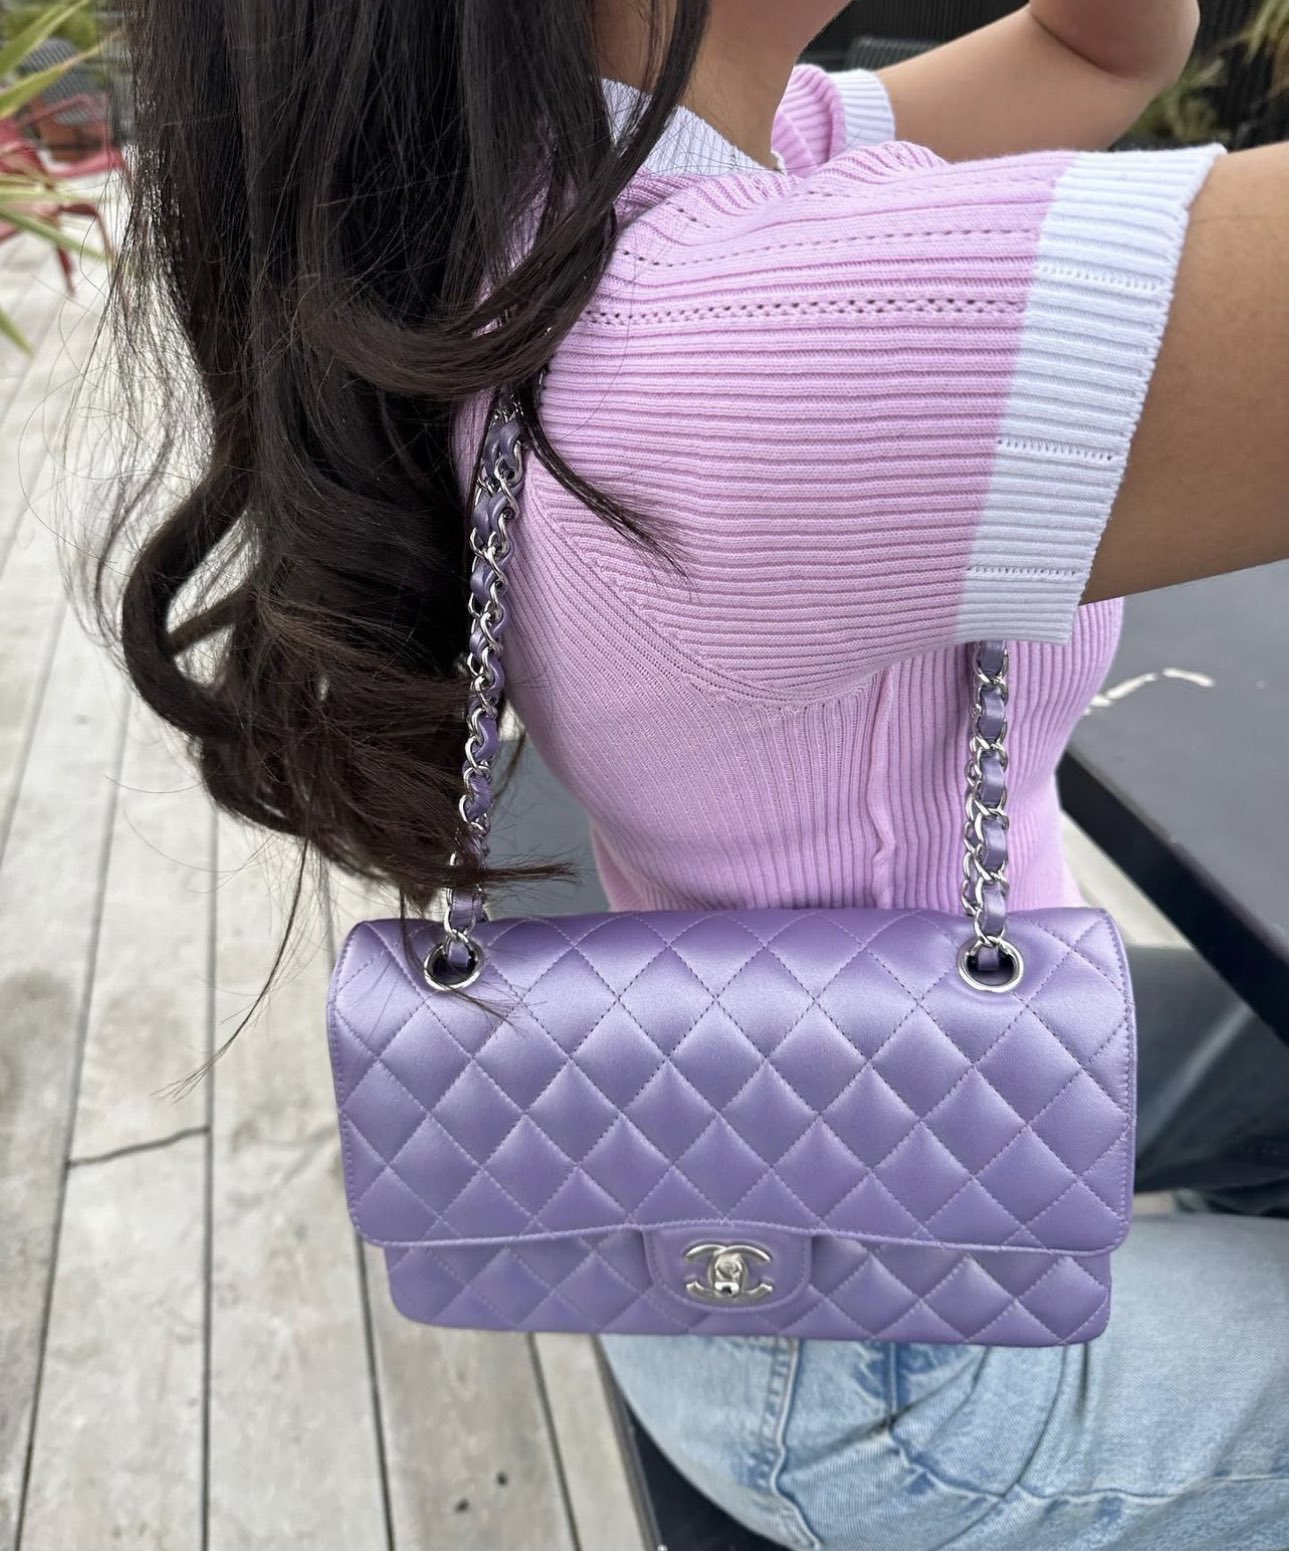 m ✨ on X: the purple chanel bag is so pretty